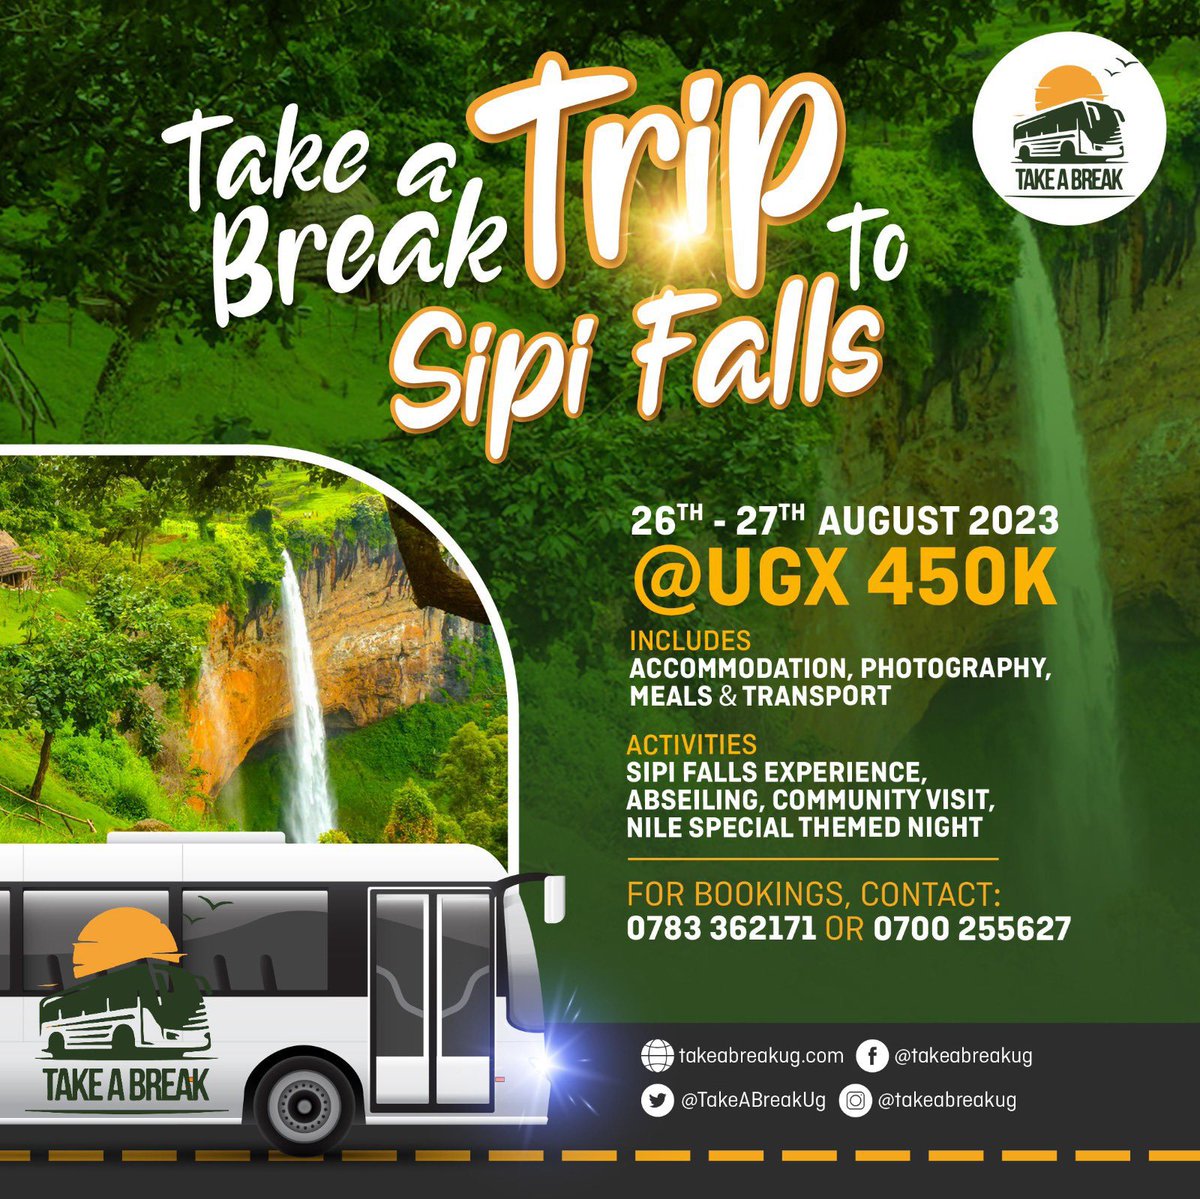 An exhilarating experience that promises to take your breath away – abseiling! Join us for this, and more during our #TakeABreak trip to the East, Aug 26-27. Cost is 450k and bookings are ongoing. DM us now for a slot. #MadeOfUganda